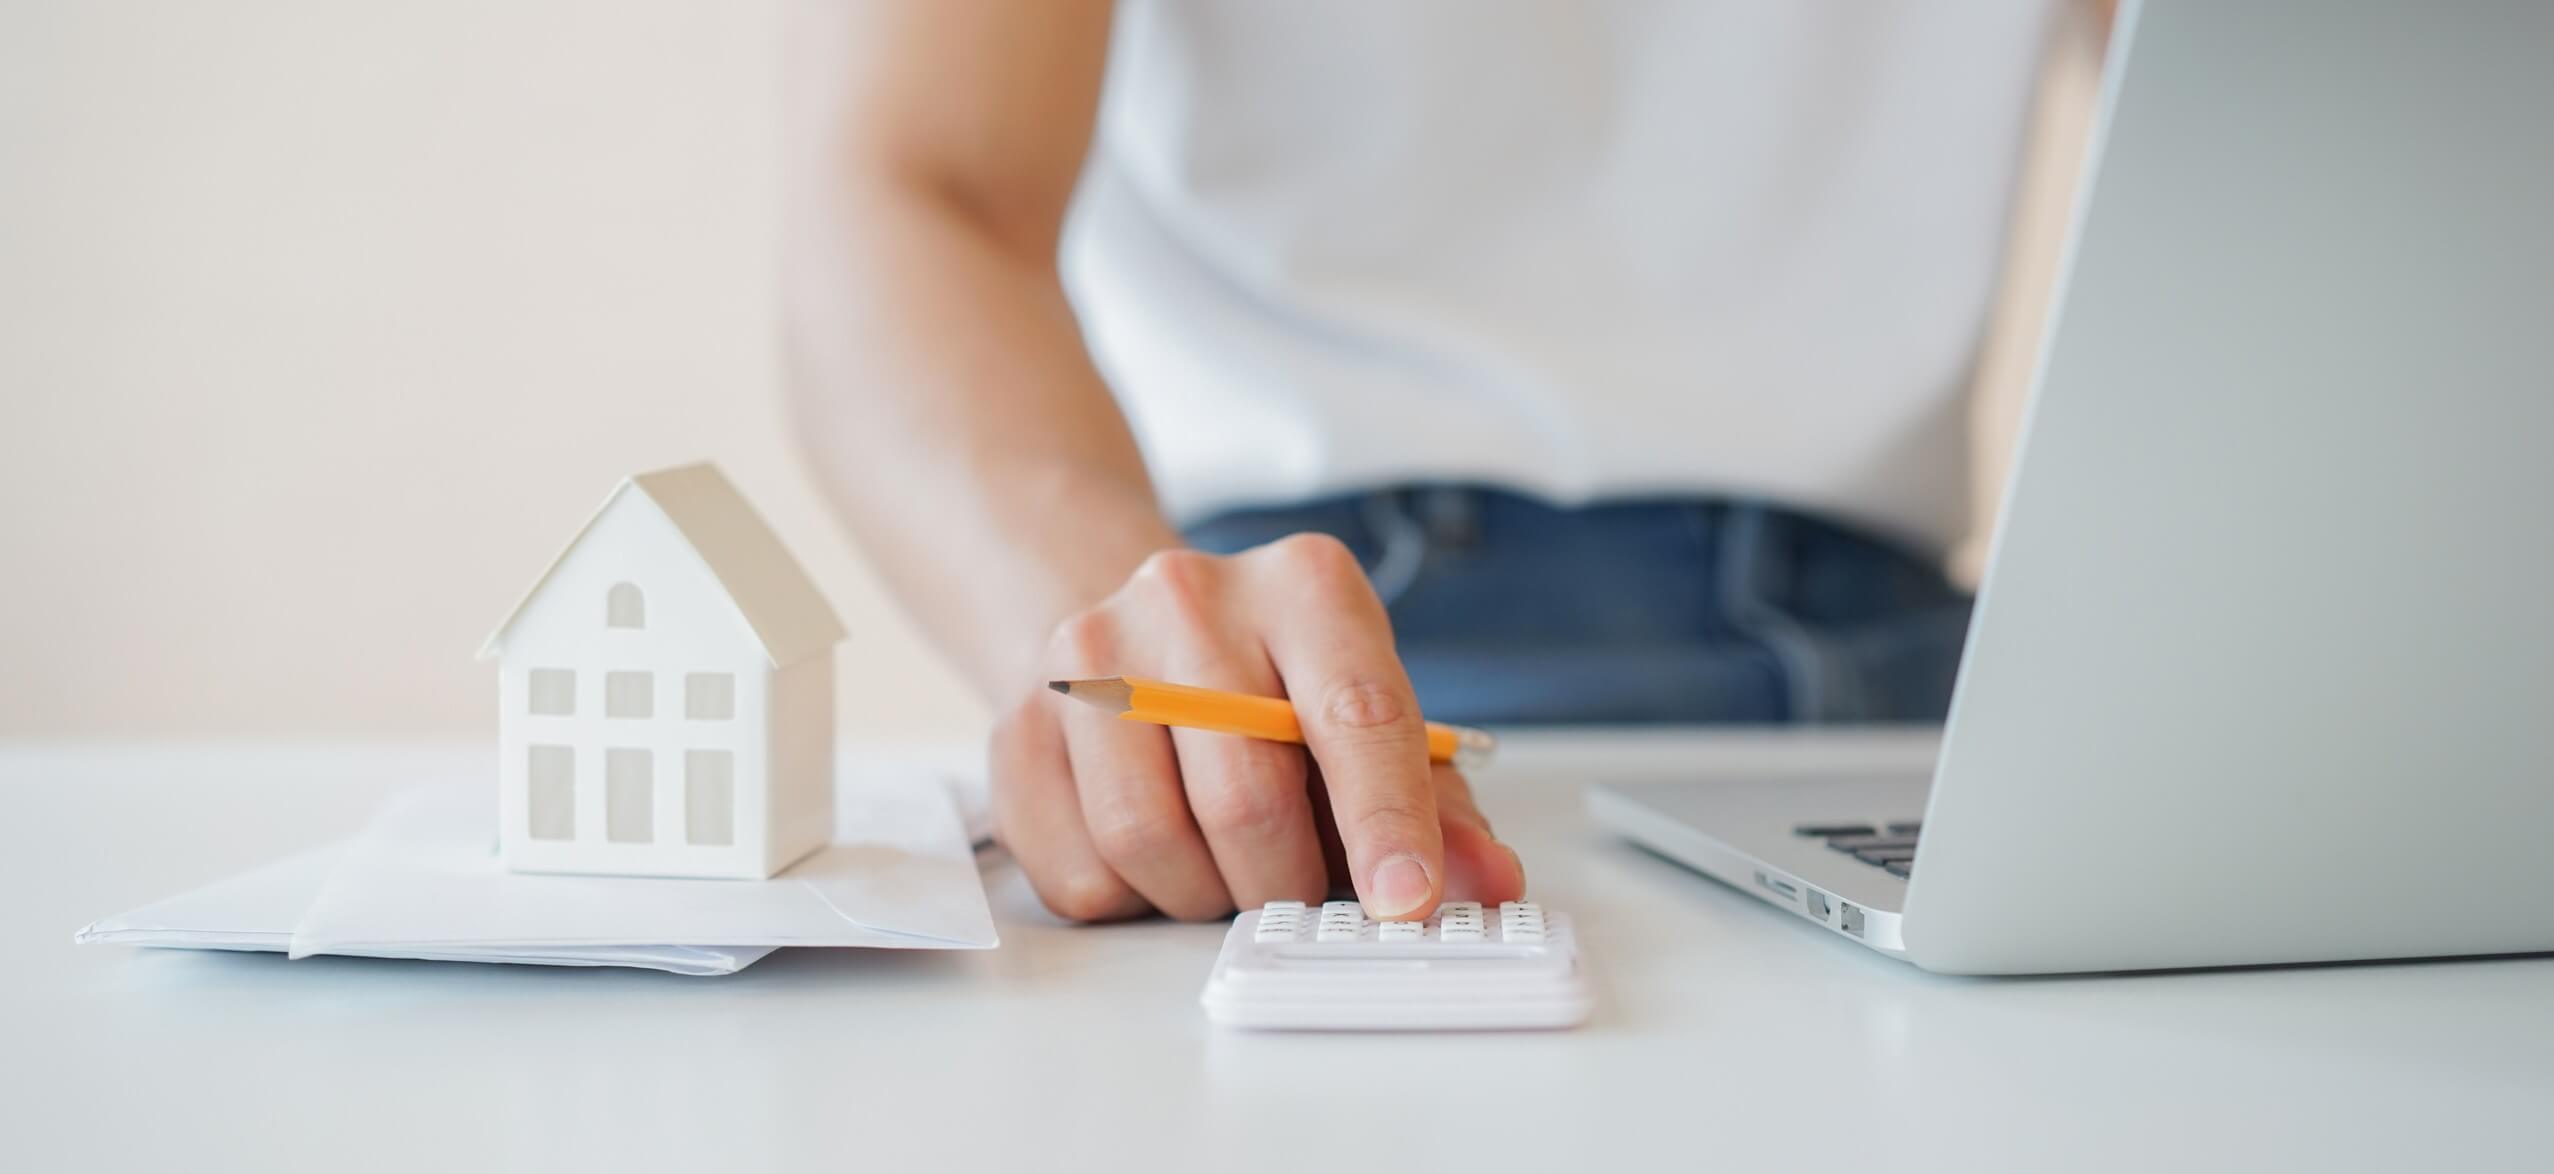 How Do Mortgage Renewals After Consumer Proposals Work?